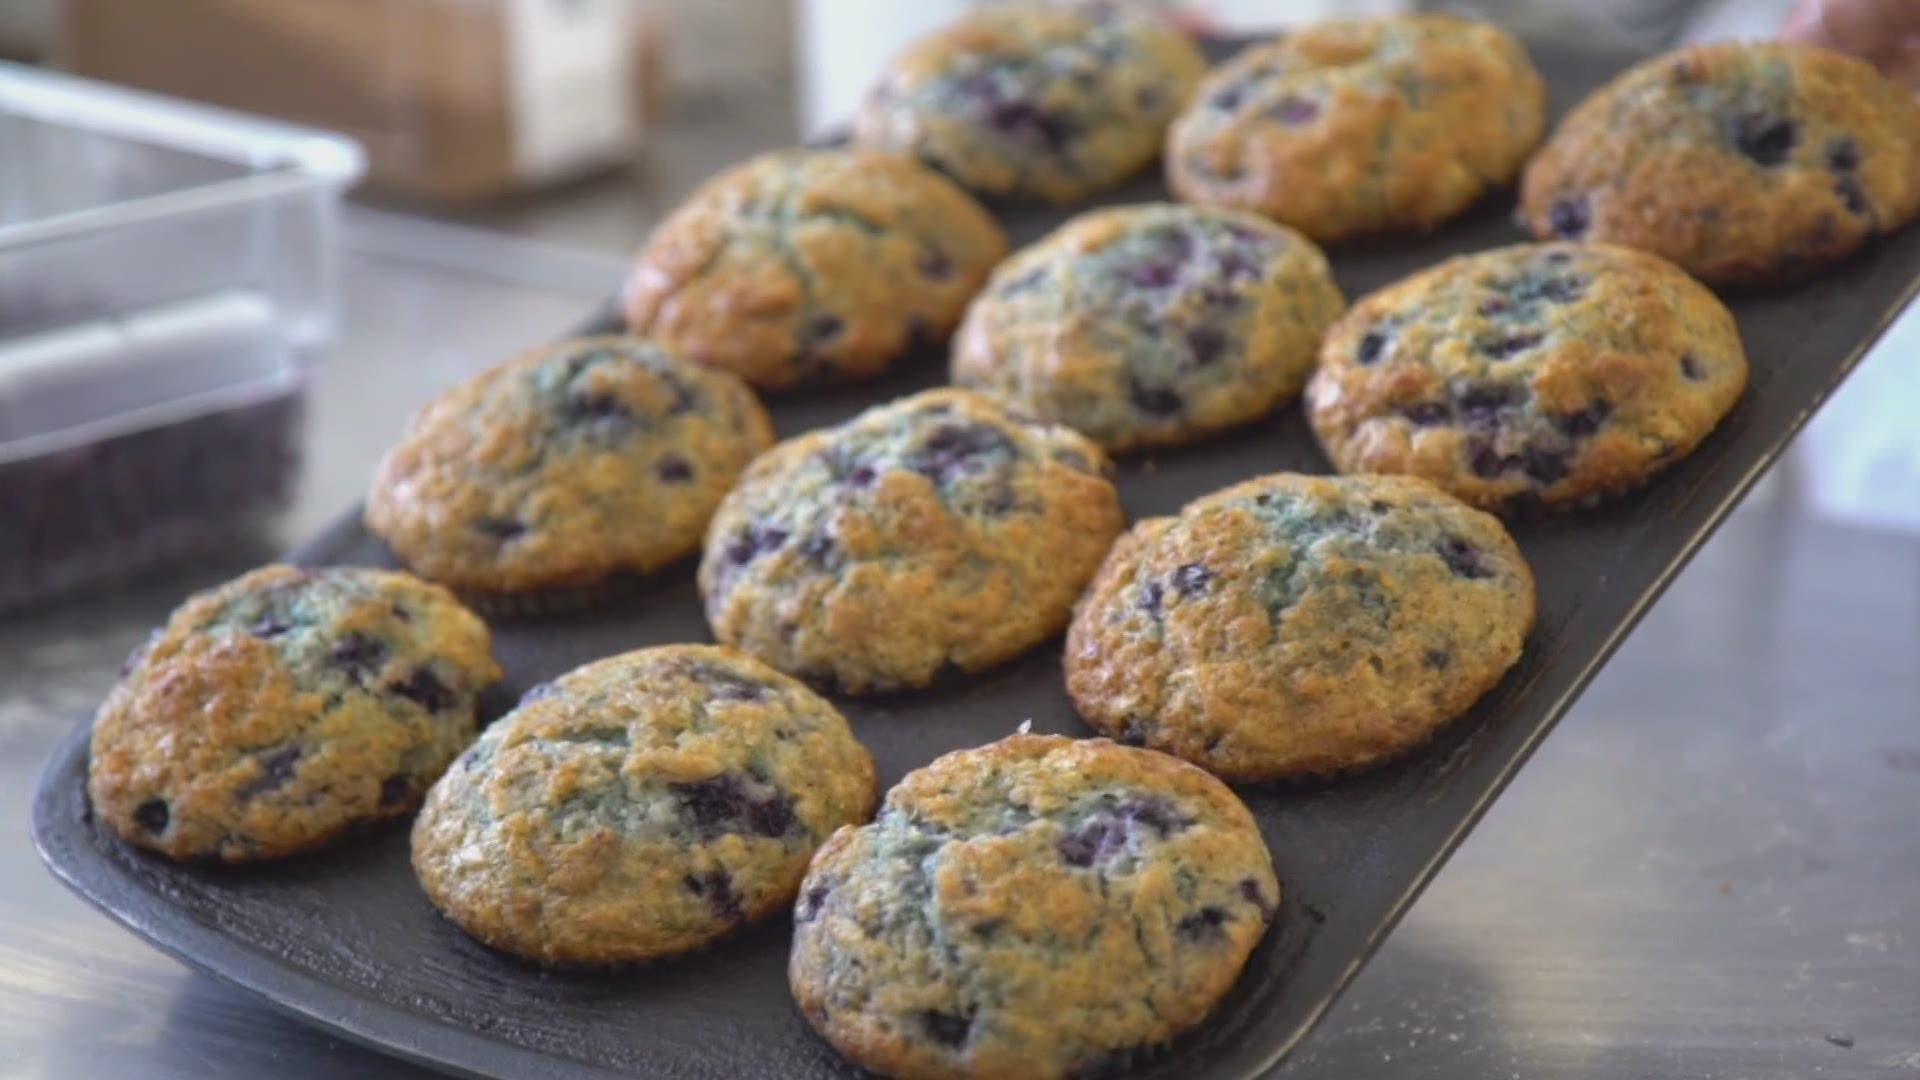 Stacy Begin from Two Fat Cats Bakery shares her recipe for blueberry muffins.